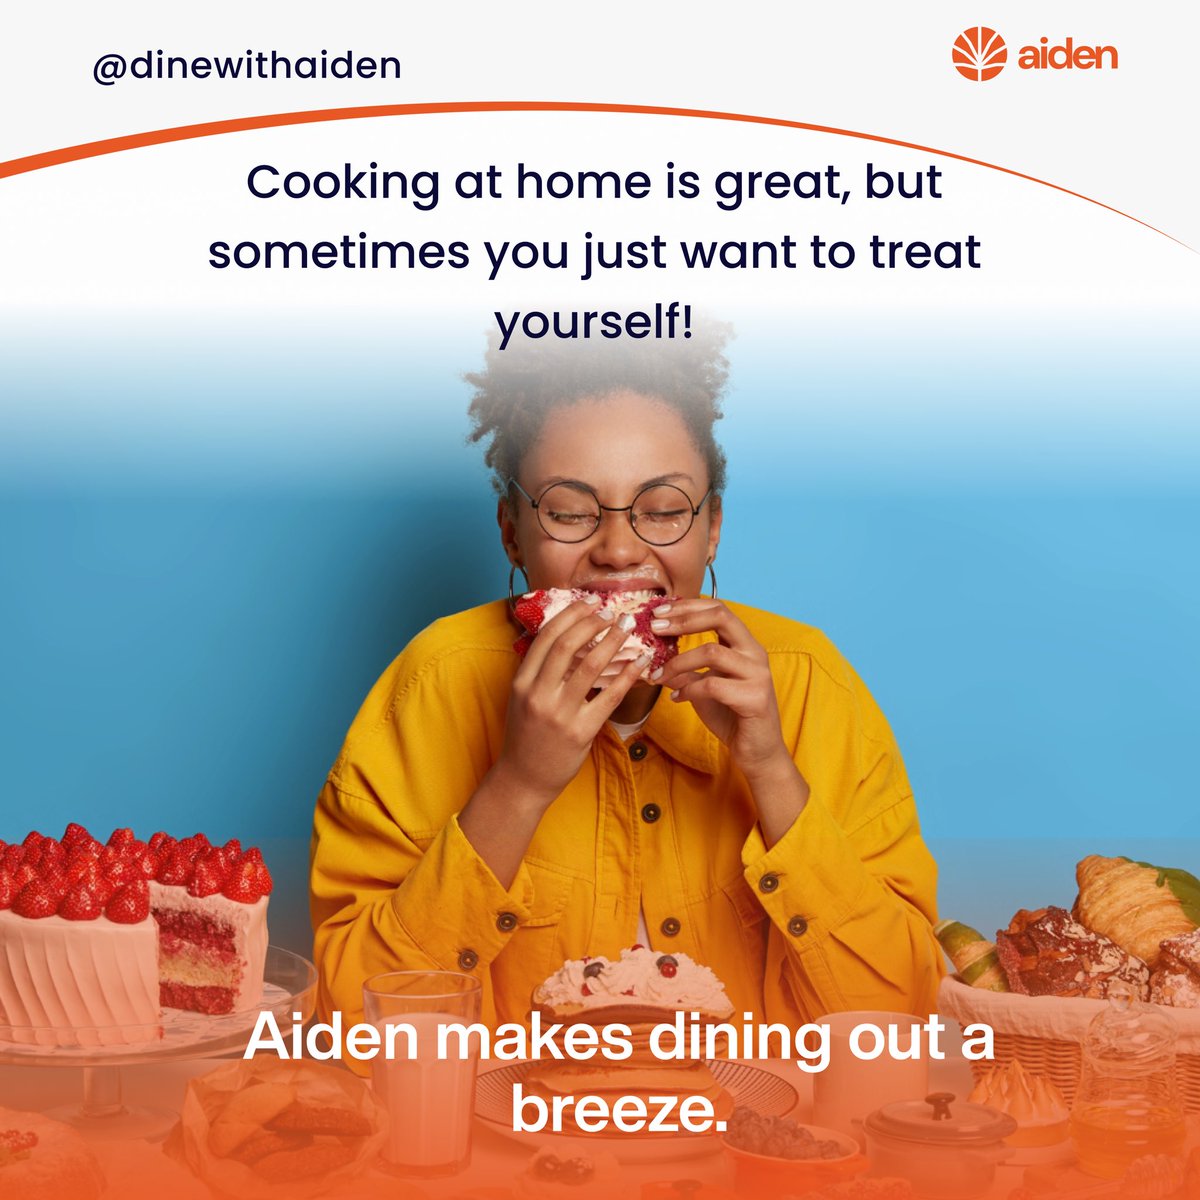 Aiden is coming soon to make dining out a breeze! With Aiden you will be able to easily 

- Discover new restaurants
- Browse menus & reviews
- Tap to reserve
- Pre-order meals
- Order in-app

 #AidenComingSoon #NaijaFoodie #dinewithaiden #erastour